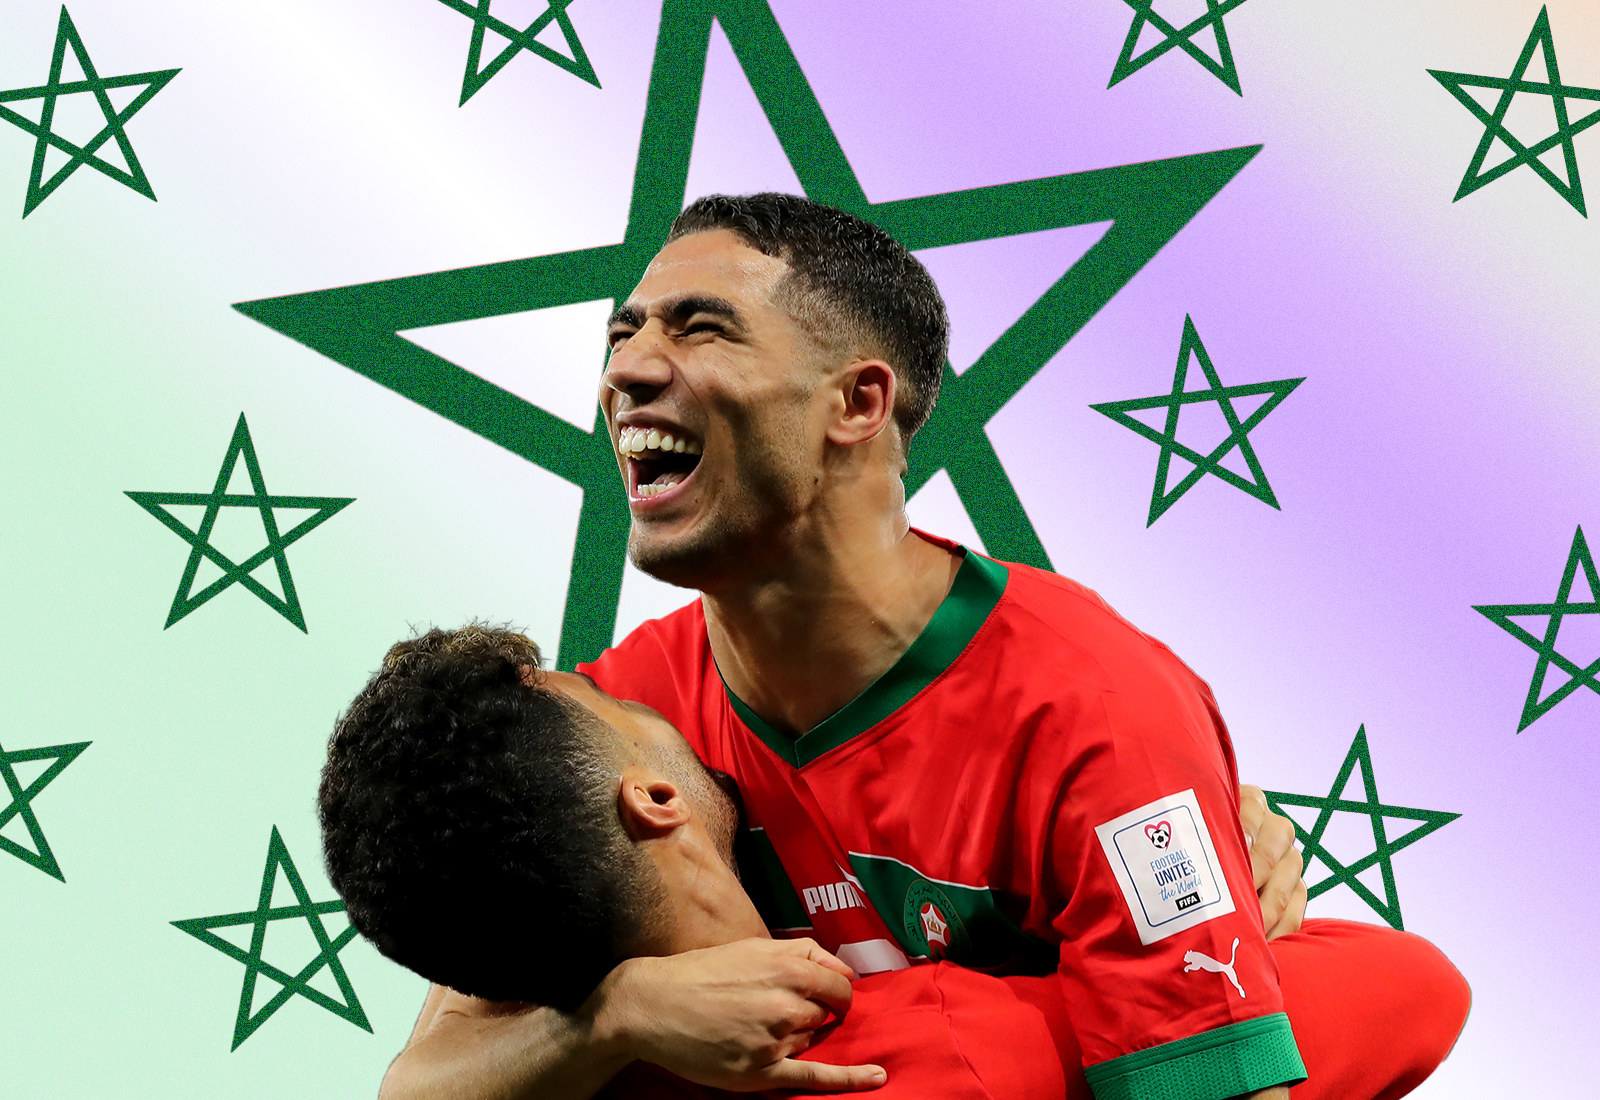 Soccer player Achraf Hakimi smiles as he is embraced by a teammate